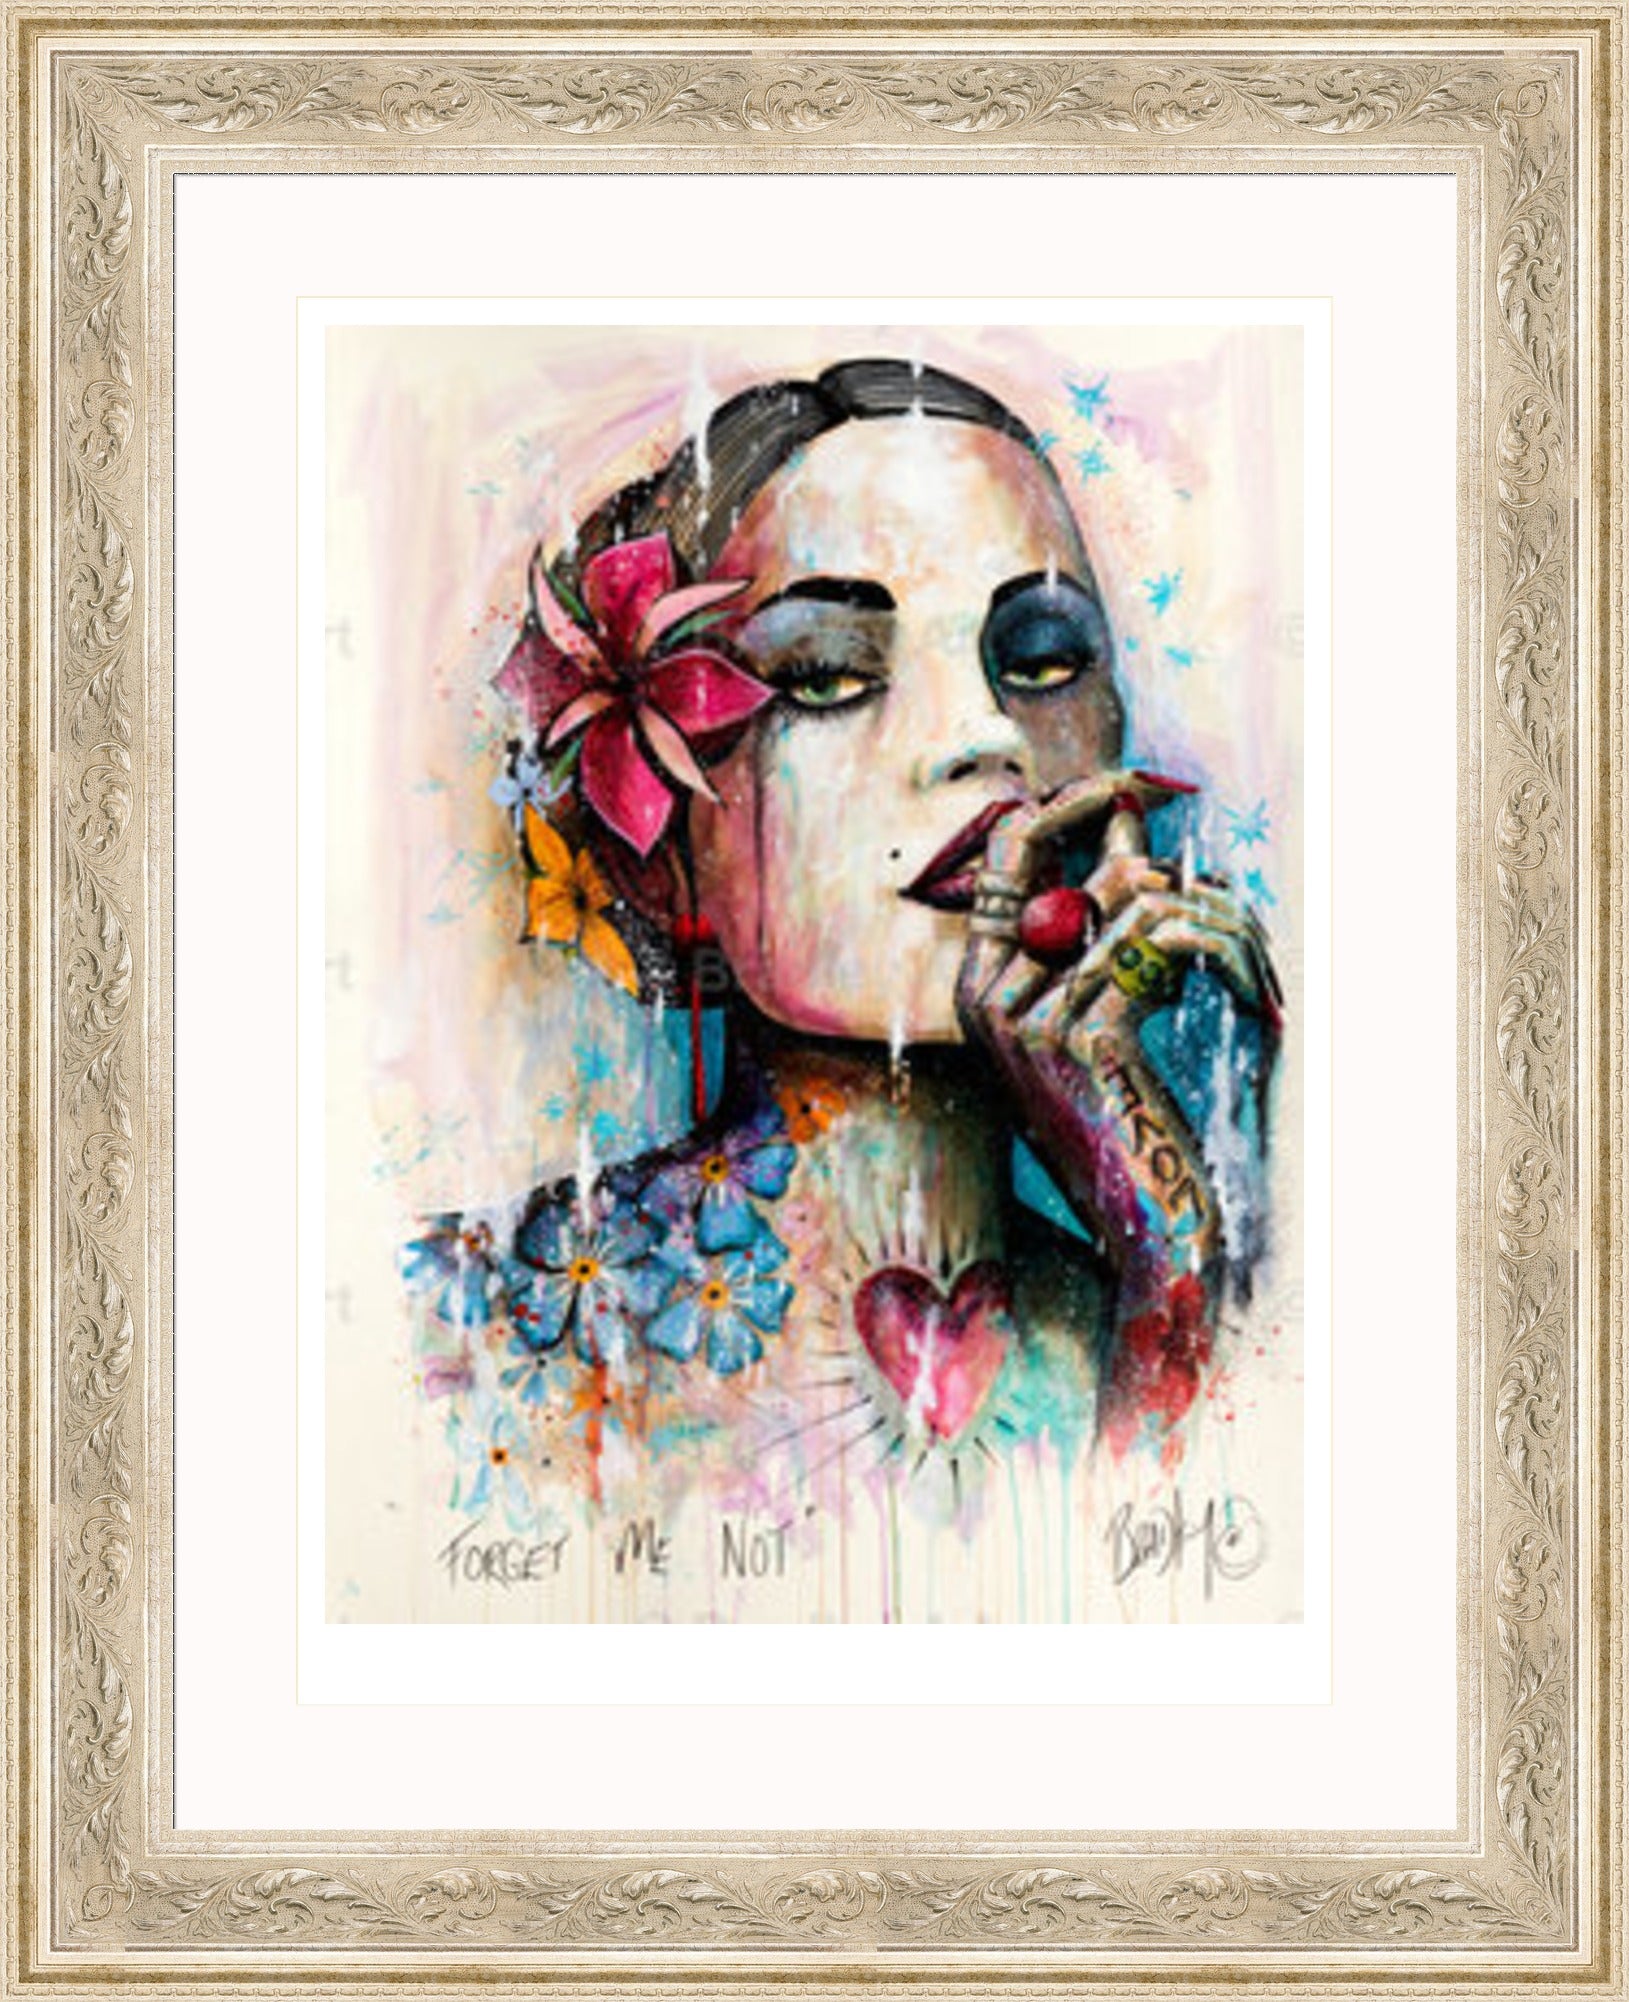 "Forget Me Not" Print